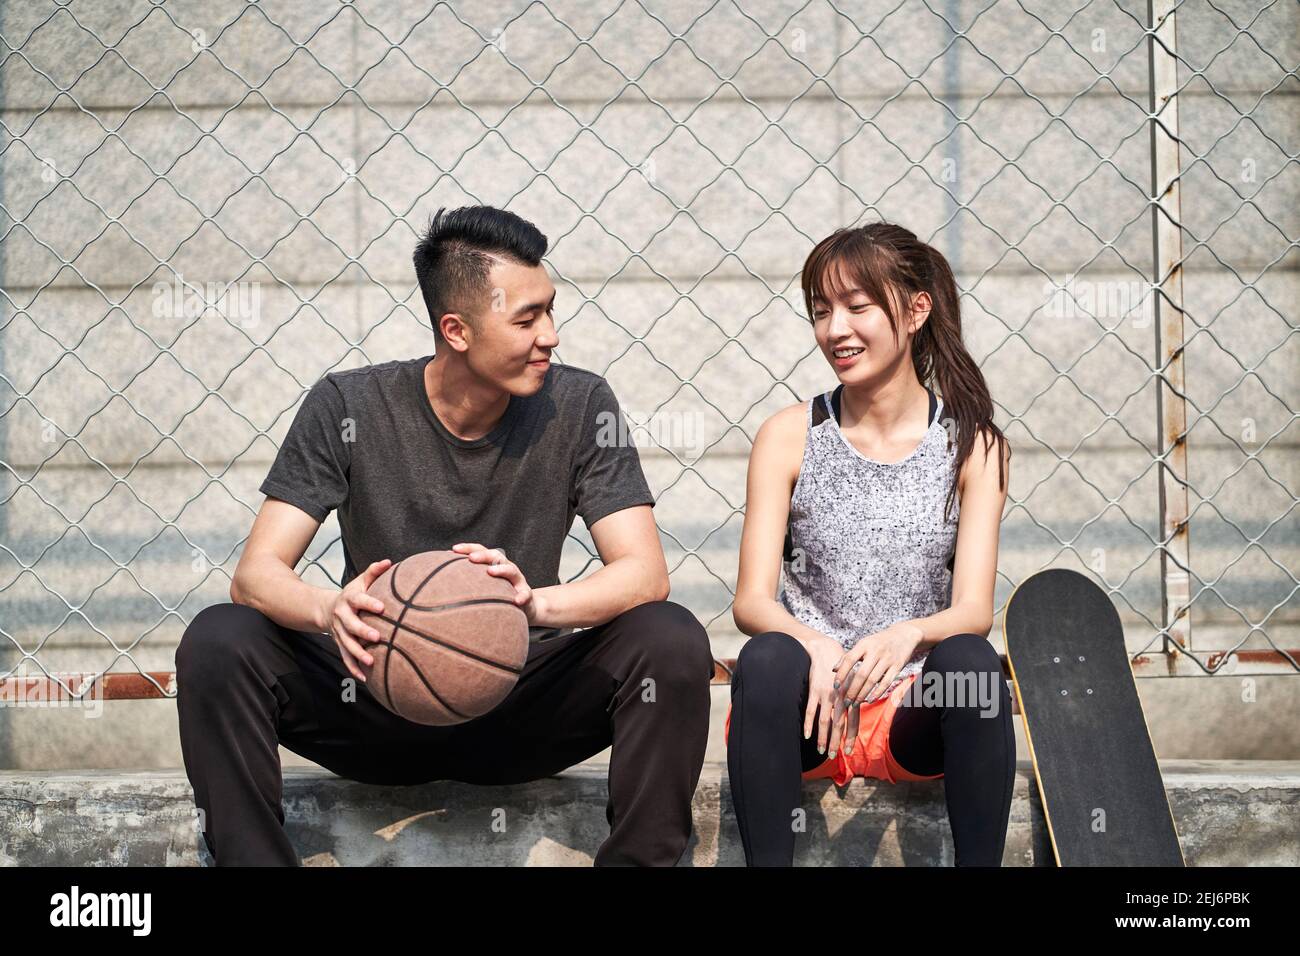 young asian adult male basketball player and female skateboarder sitting on court side talking chatting Stock Photo